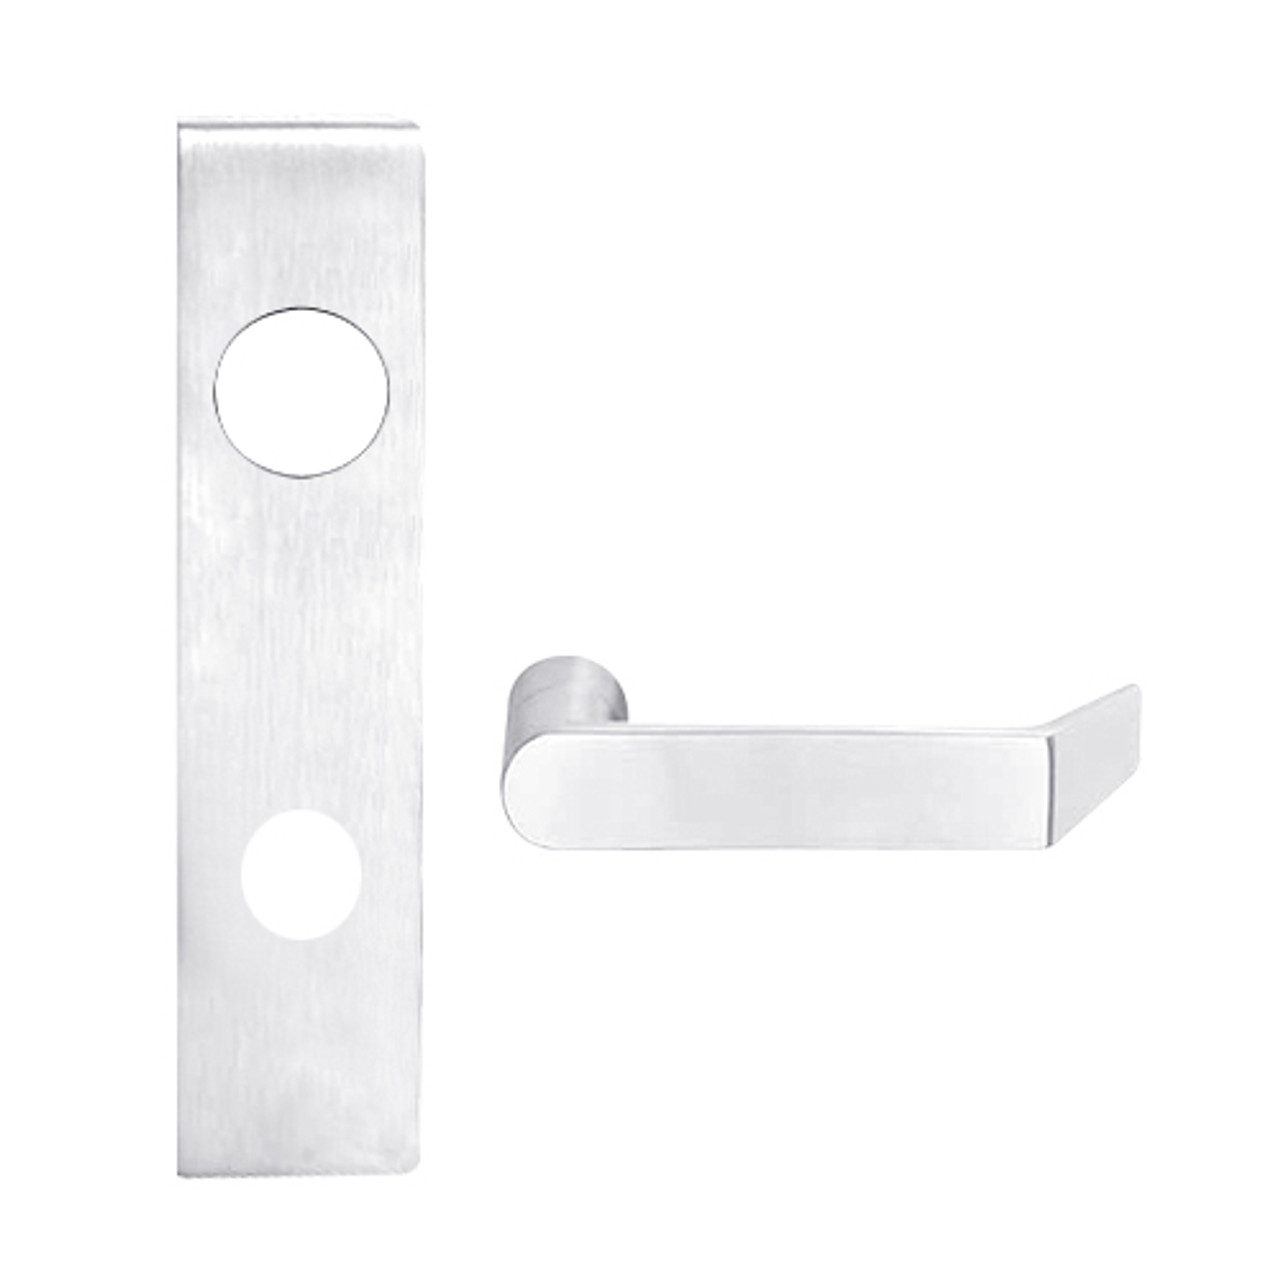 L9050J-06L-625 Schlage L Series Entrance Commercial Mortise Lock with 06 Cast Lever Design Prepped for FSIC in Bright Chrome